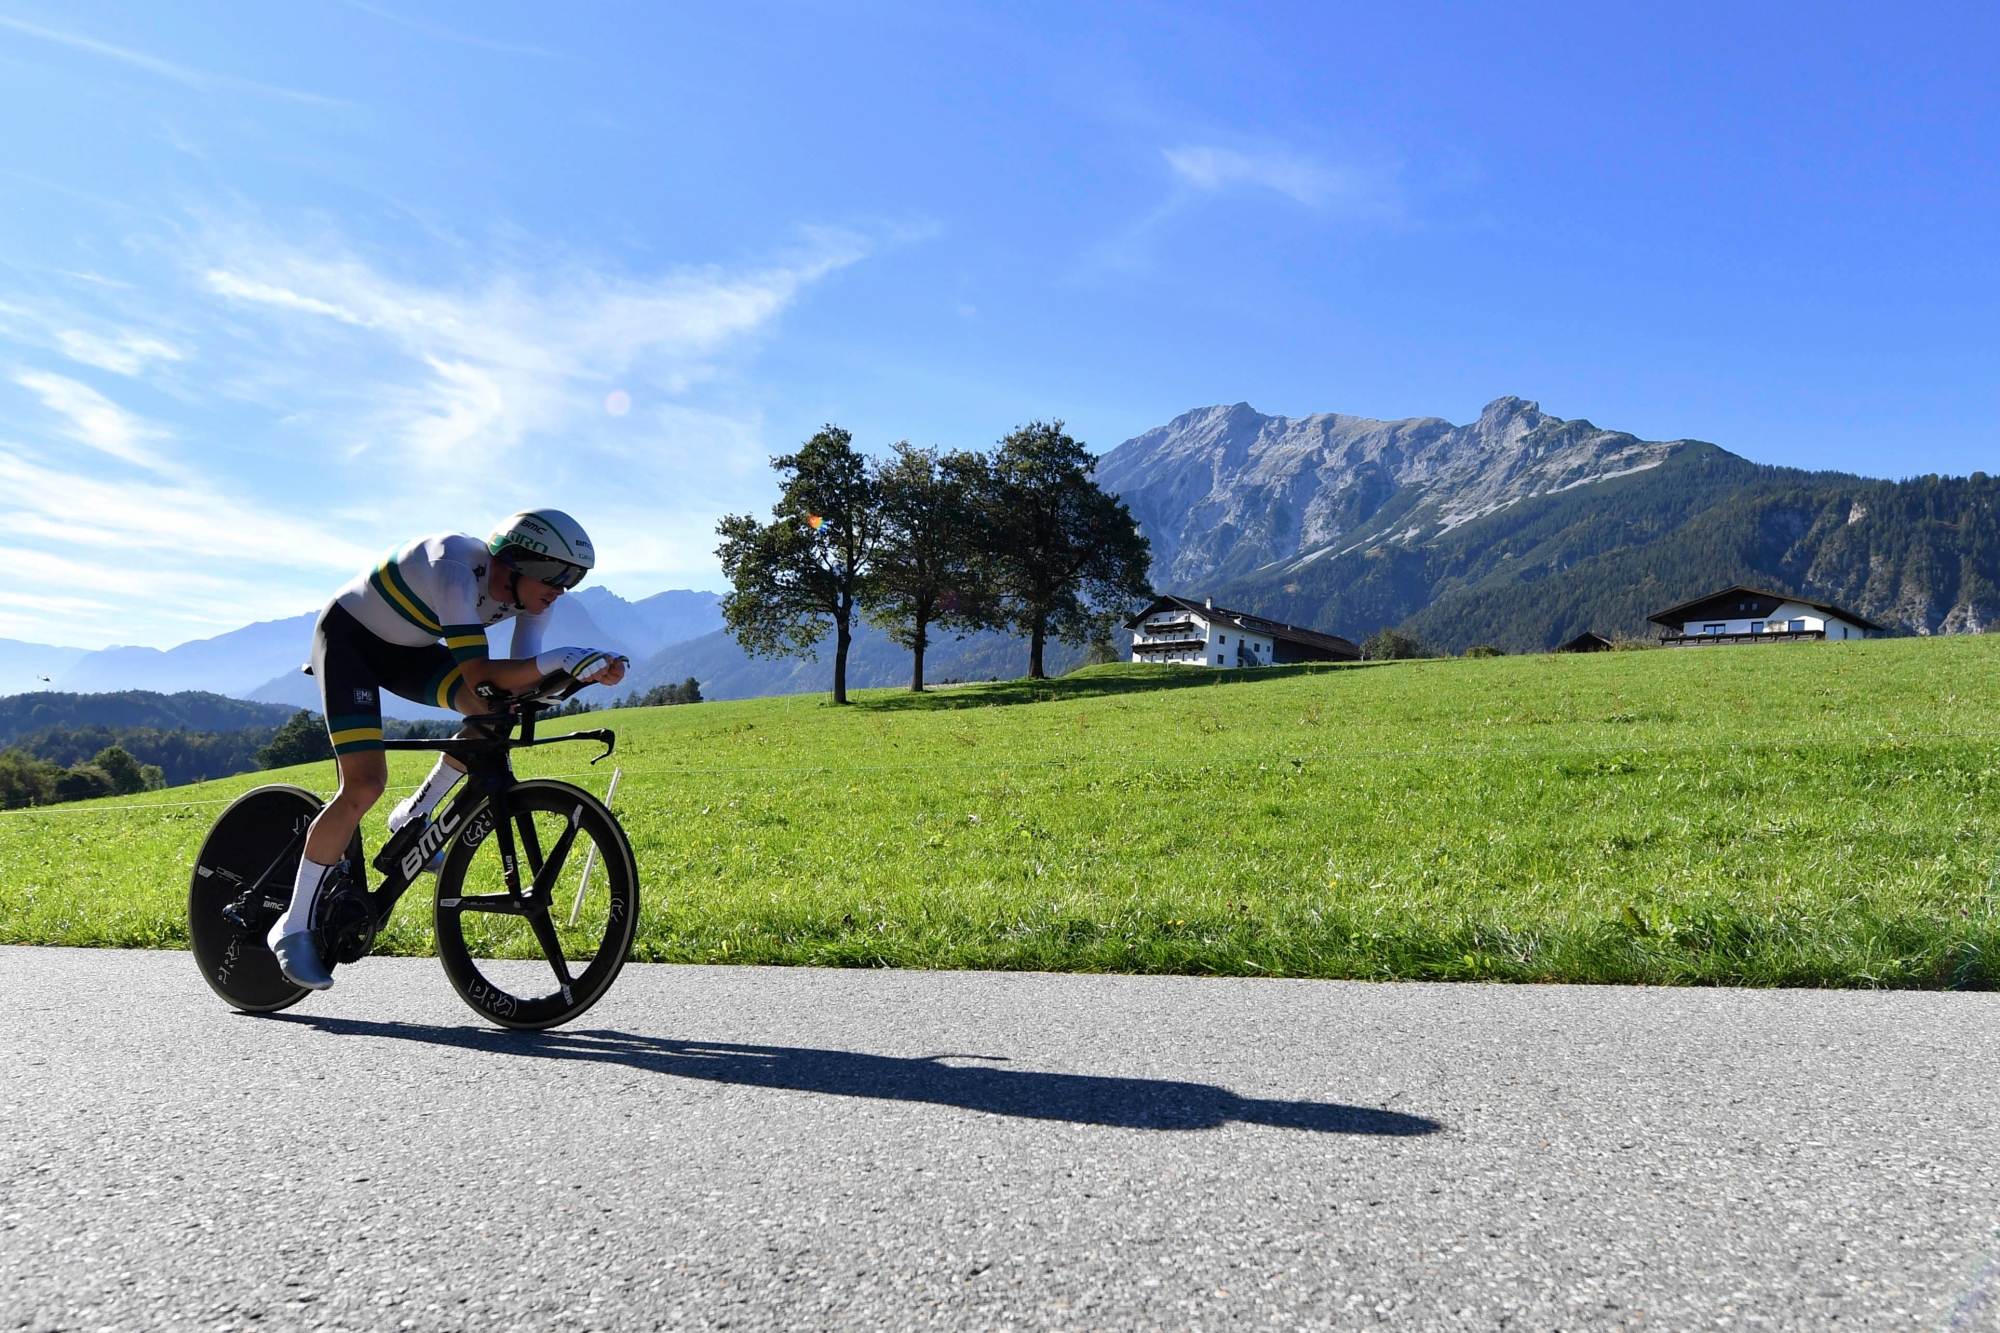 Rohan Dennis of Australia competes in the men's individual time trial at the Road Cycling World Championships in Innsbruck, Austria, Wednesday, Sept. 26, 2018. (AP Photo/Kerstin Joensson) AUSTRIA CYLING WORLDS